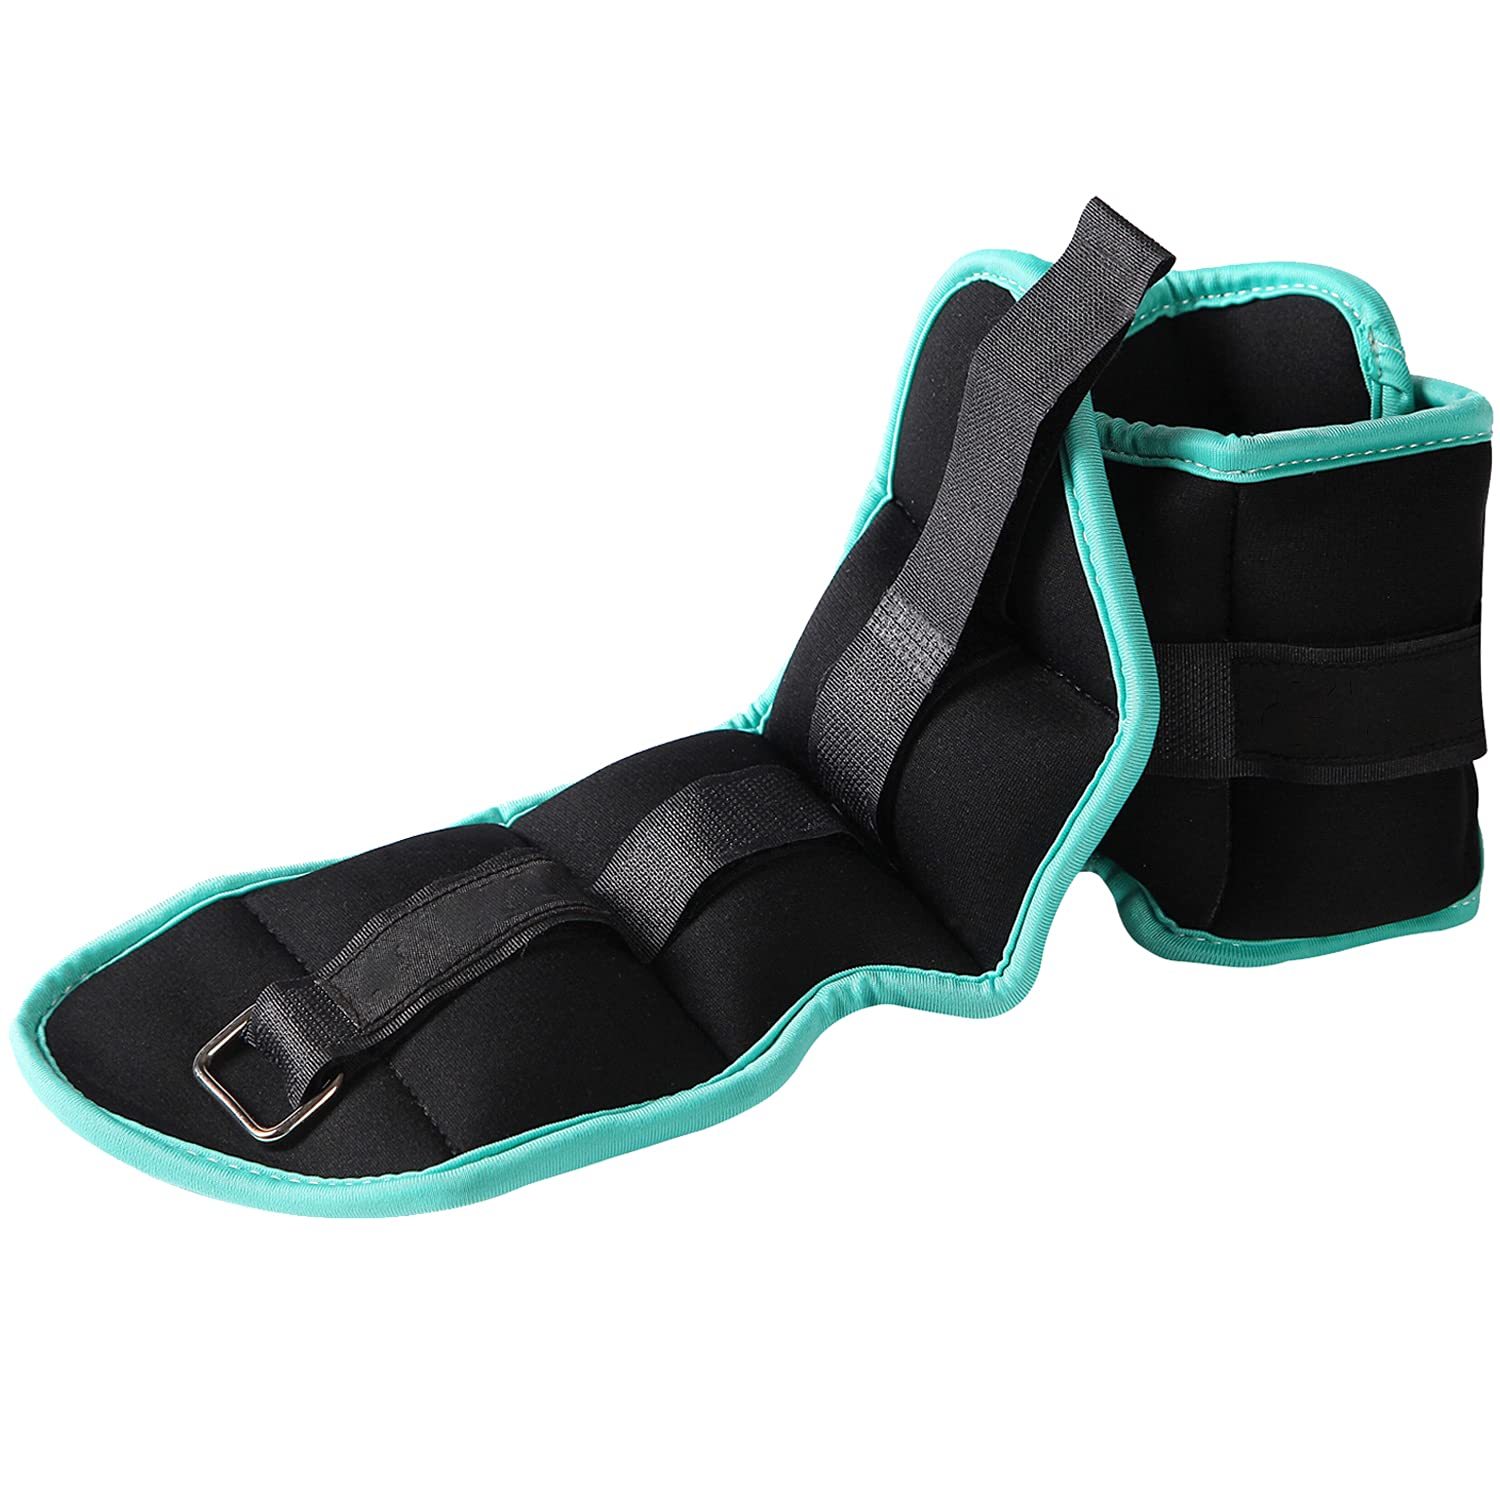 Primary image for Ankle Weight Pair 1.5 Lbs, Set Of 2 With Adjustable Velcro Straps - Breathable, 